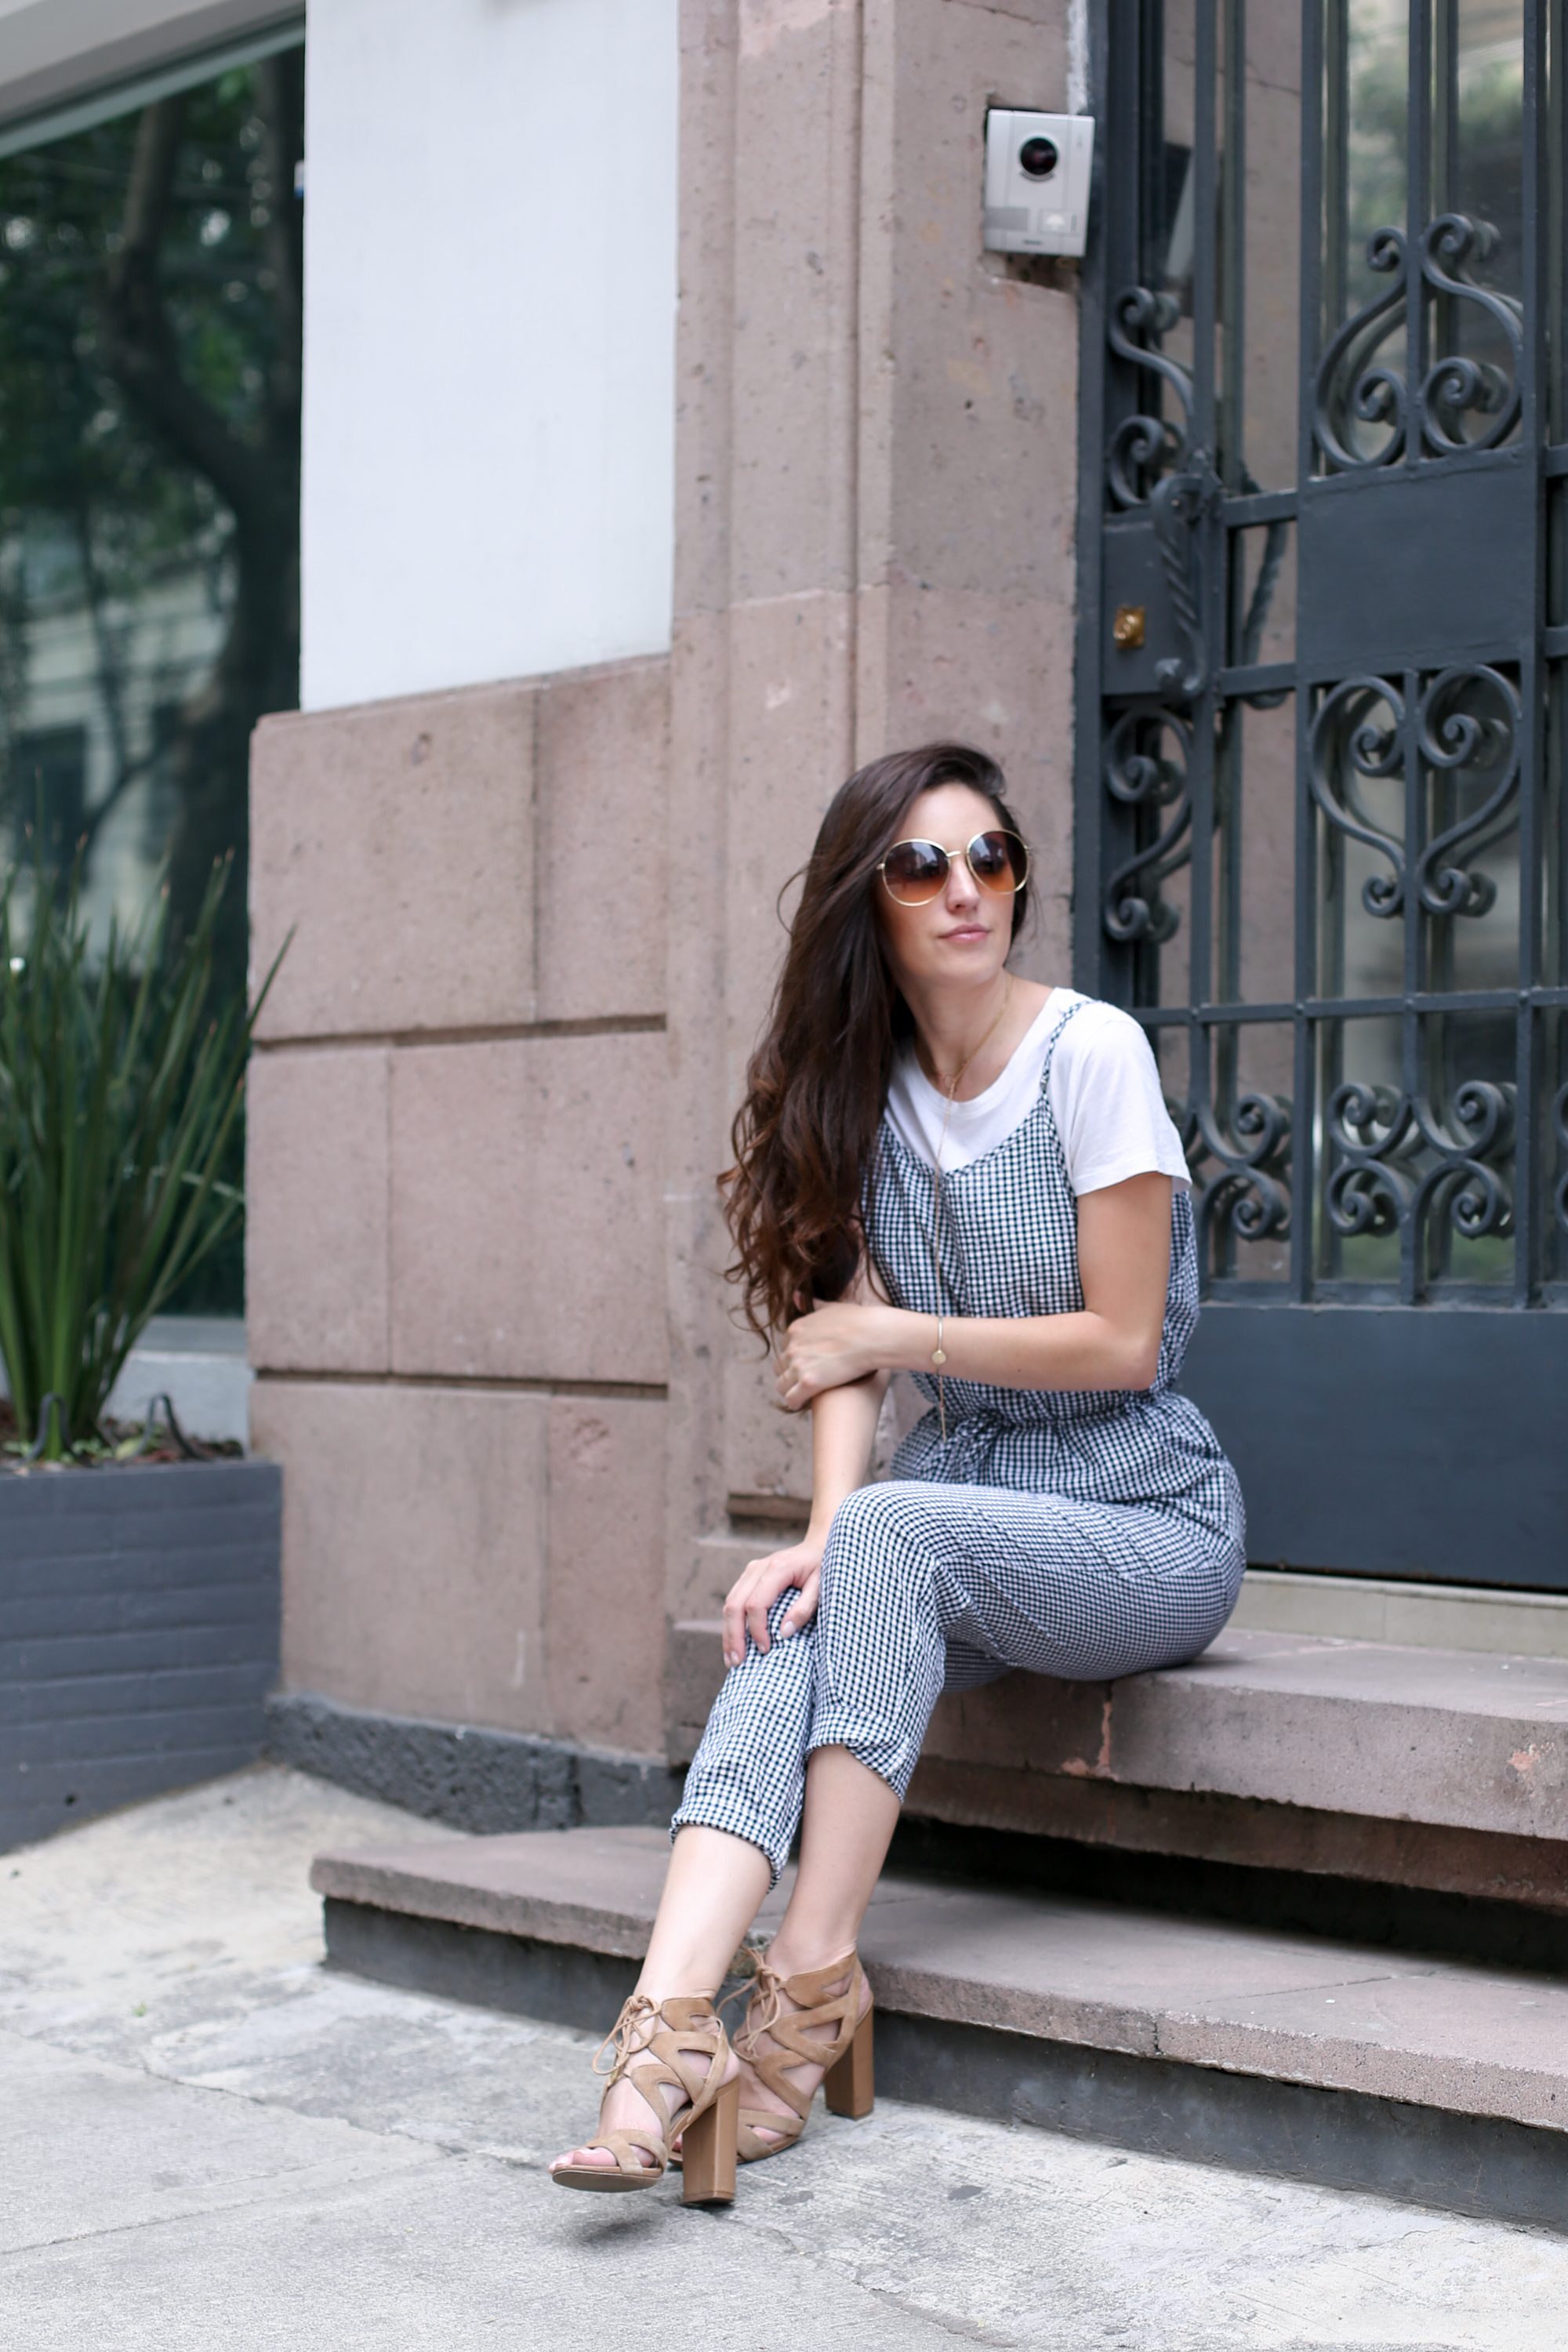 gingham jumpsuit, polanco mexico city, where to shop in mexico city, best neighborhoods in mexico city, round gold rimmed sunglasses, summer style, spring style, summer outfit ideas, spring outfit ideas, style and travel blogger